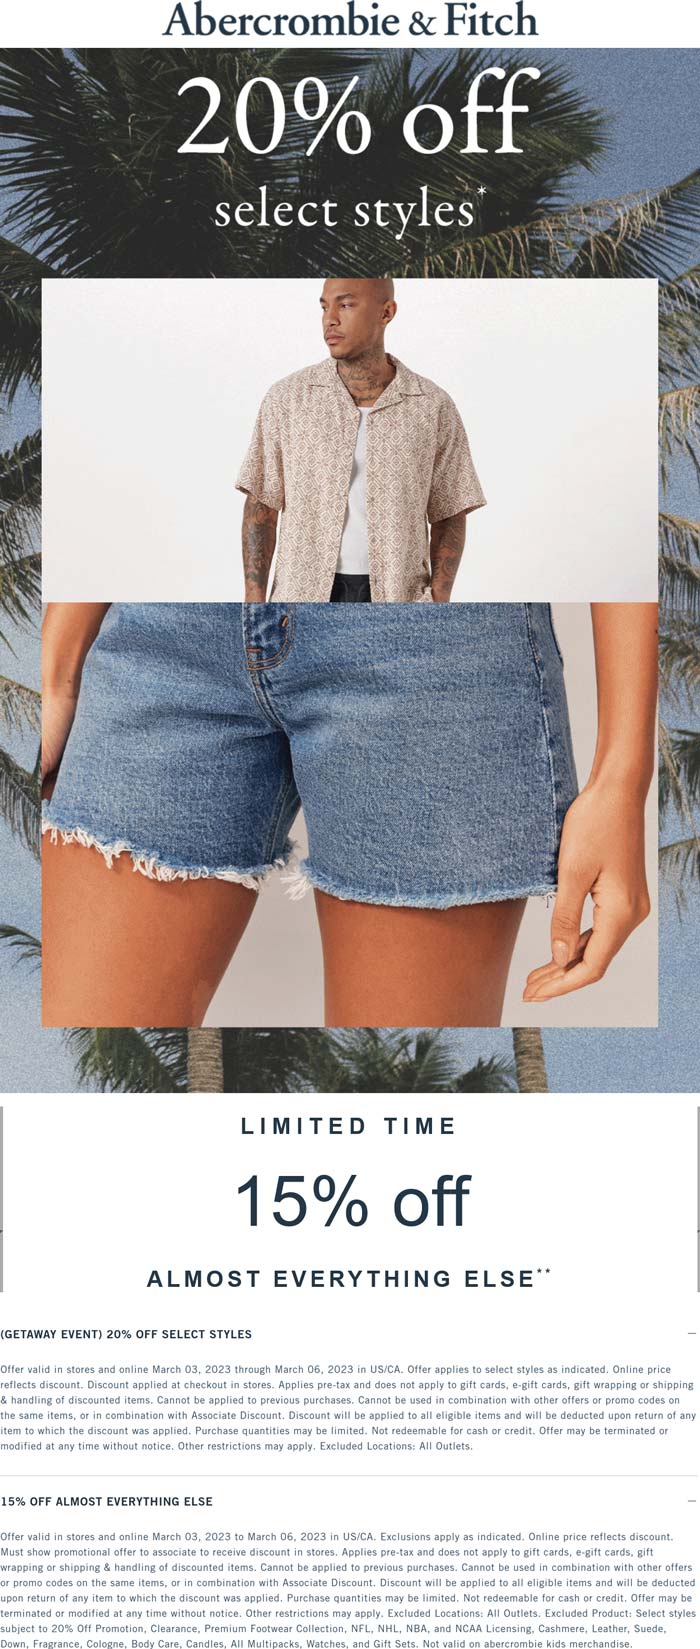 Abercrombie & Fitch stores Coupon  15-20% off everything at Abercrombie & Fitch, ditto online #abercrombiefitch 